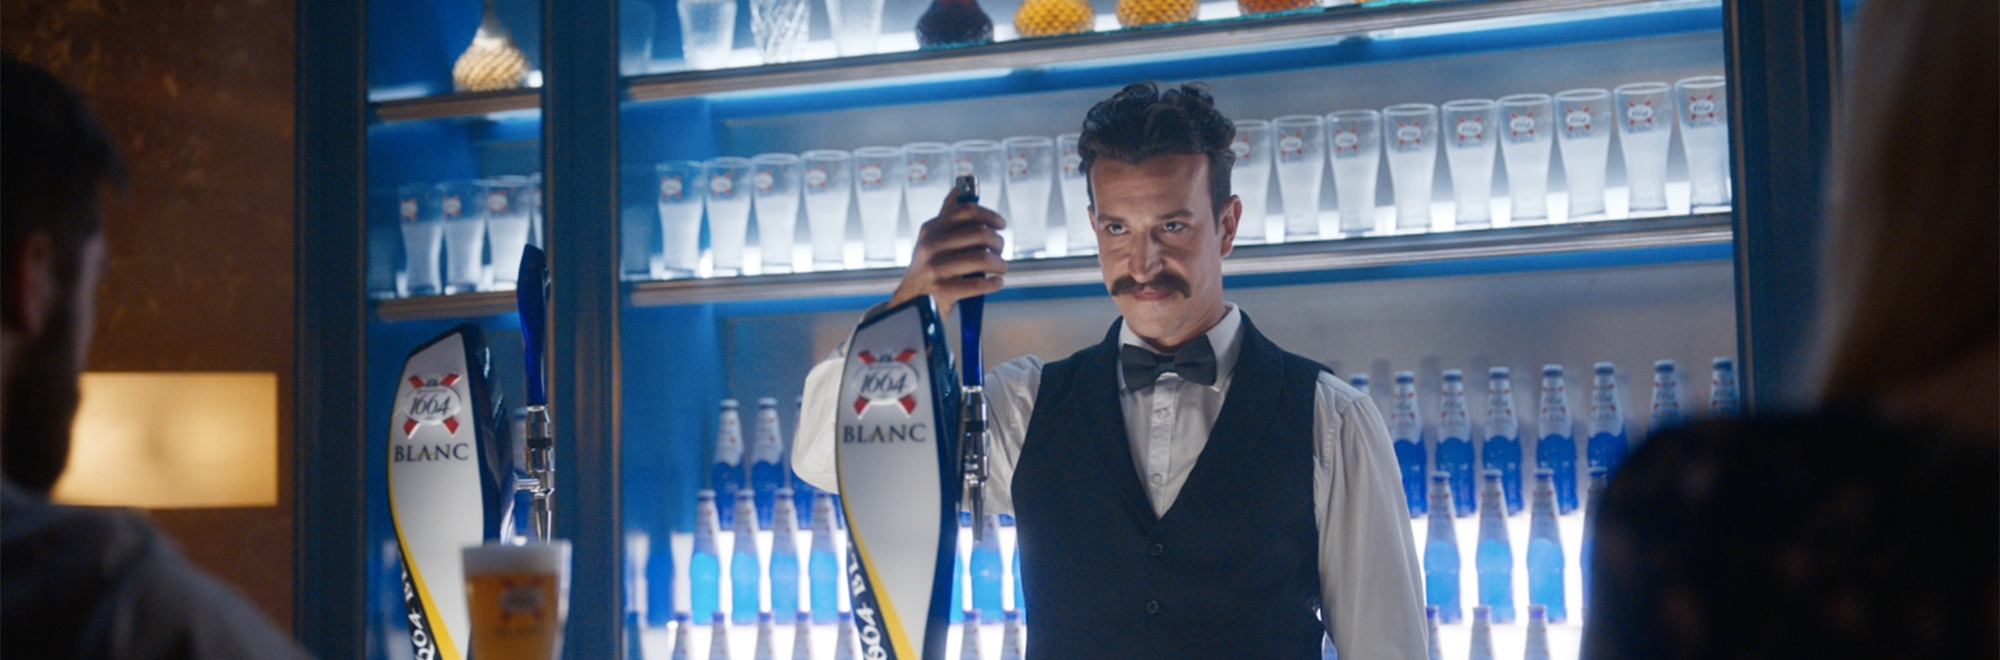 Kronenbourg 1664 Blanc and Fold7 introduce ‘Good taste with a twist’ in global TV campaign